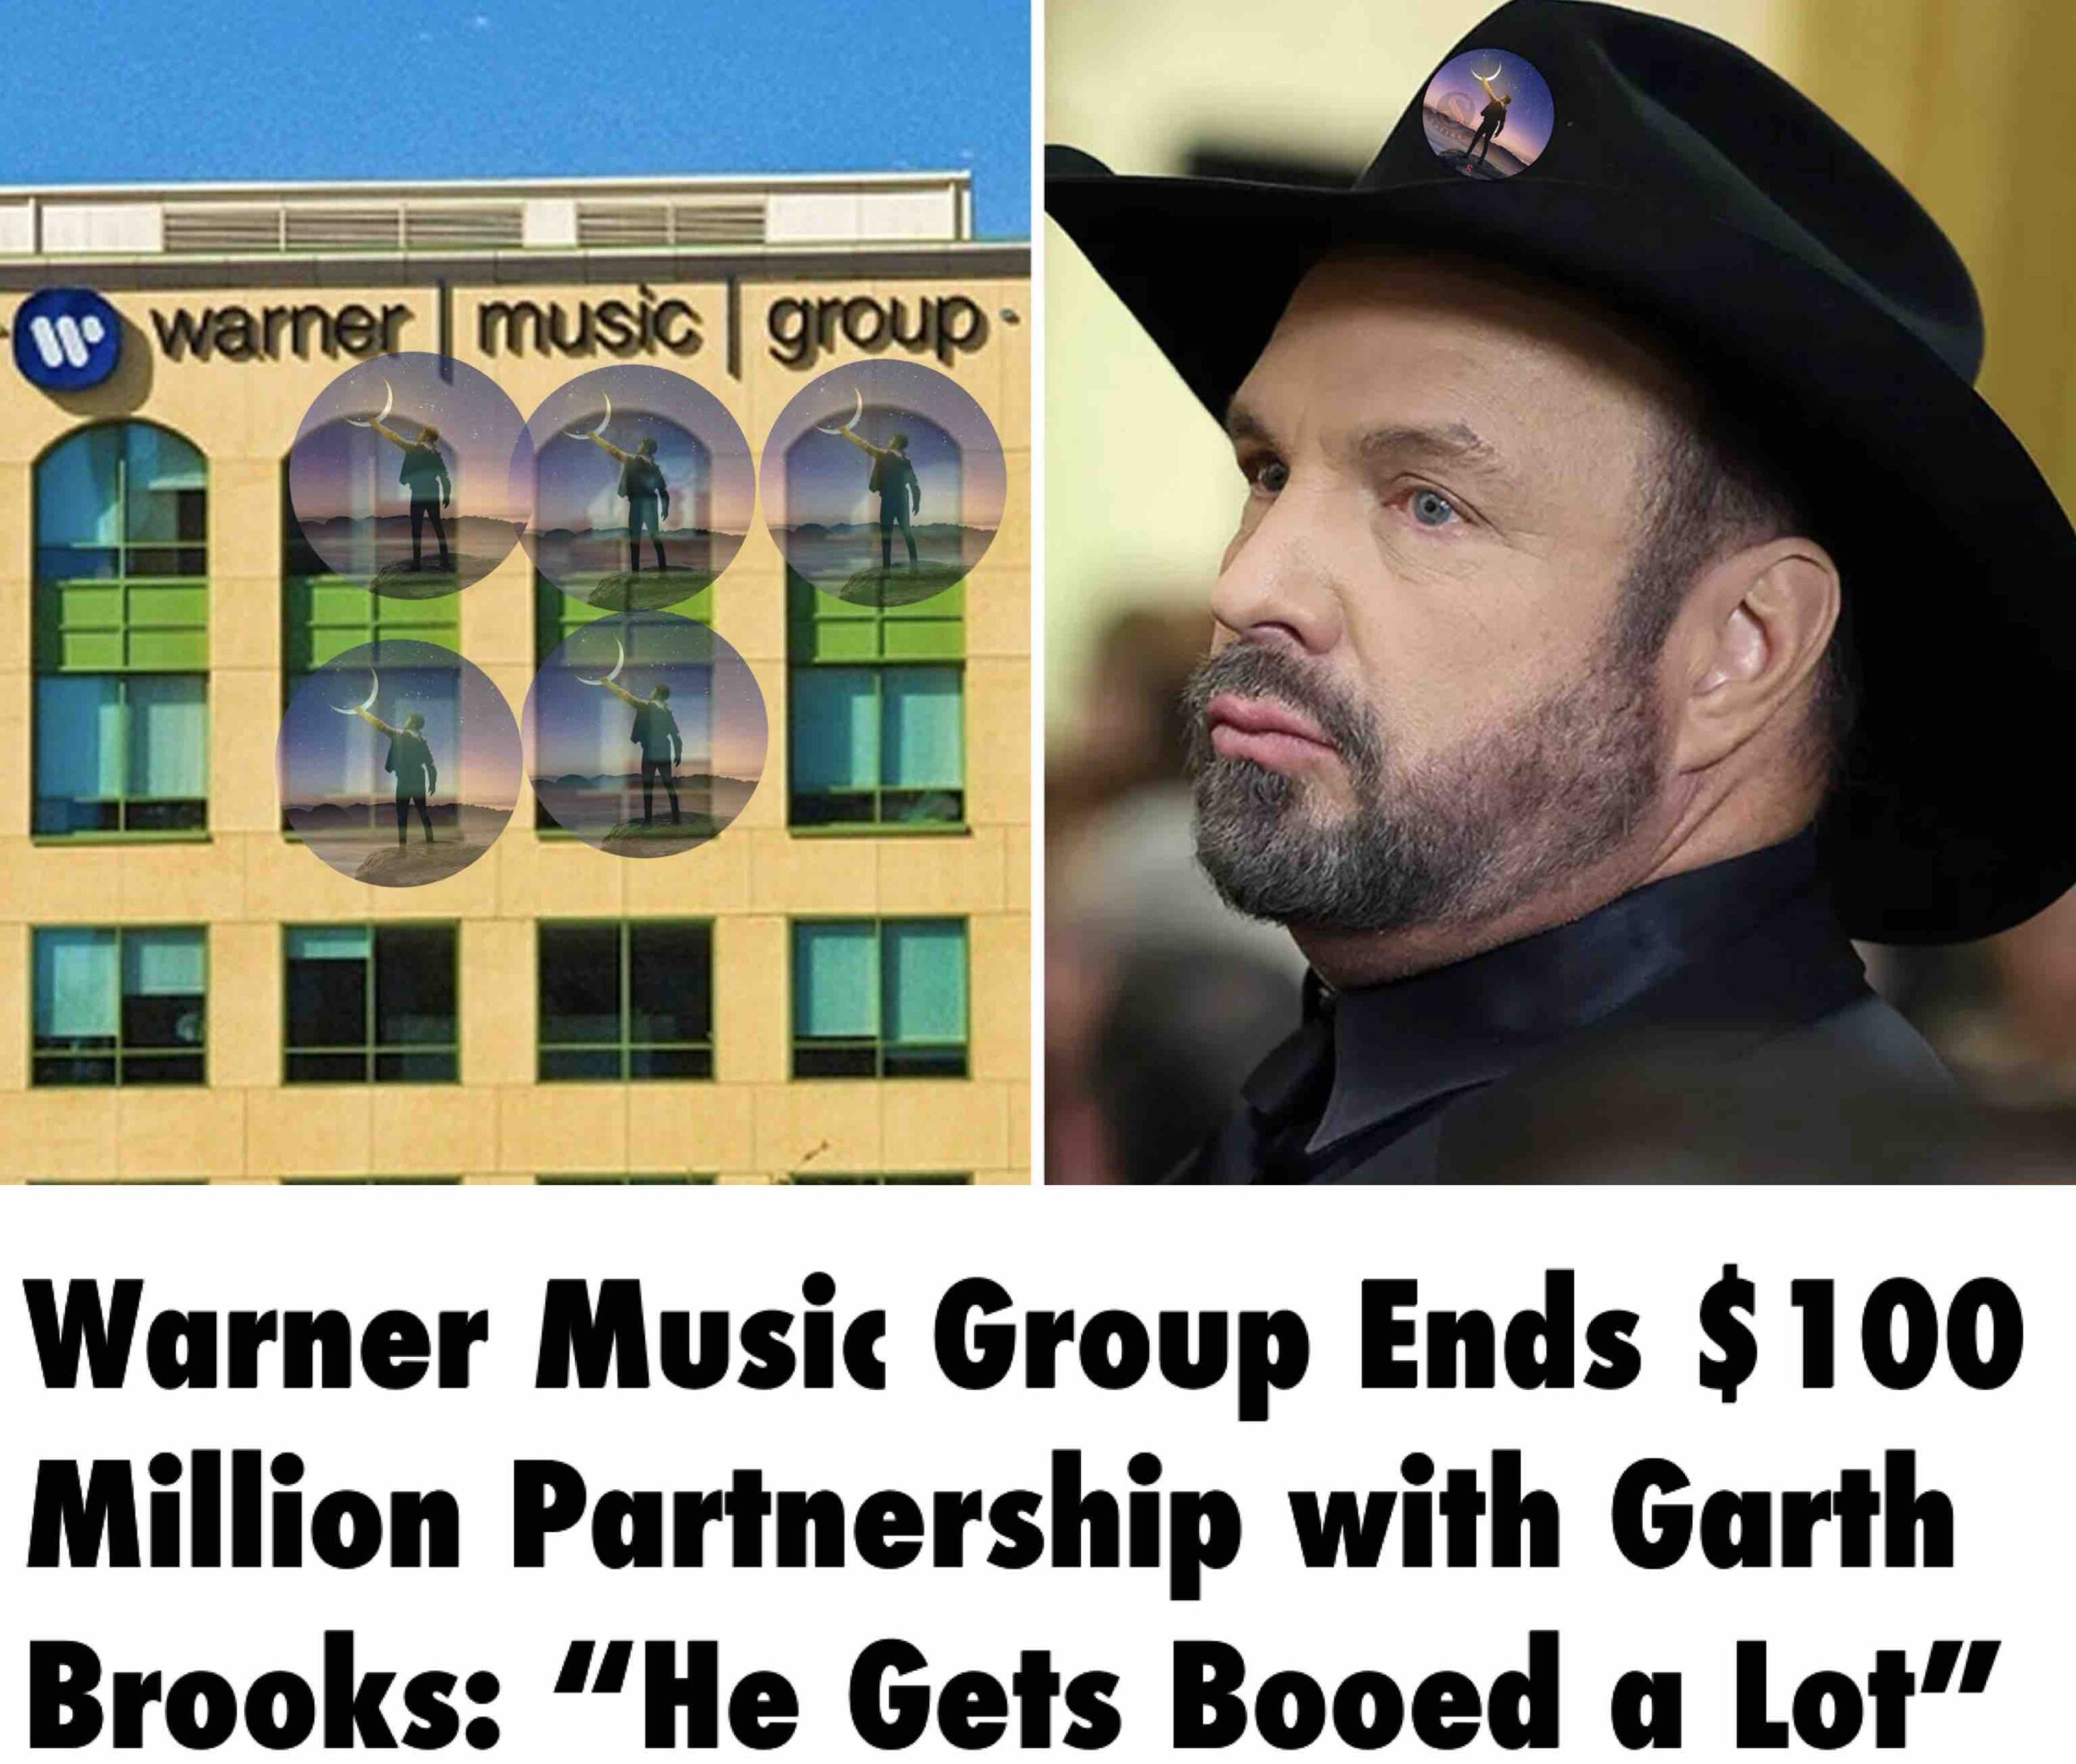 Warner Music Group Ends $100 Million Partnership with Garth Brooks: “He Gets Booed a Lot”